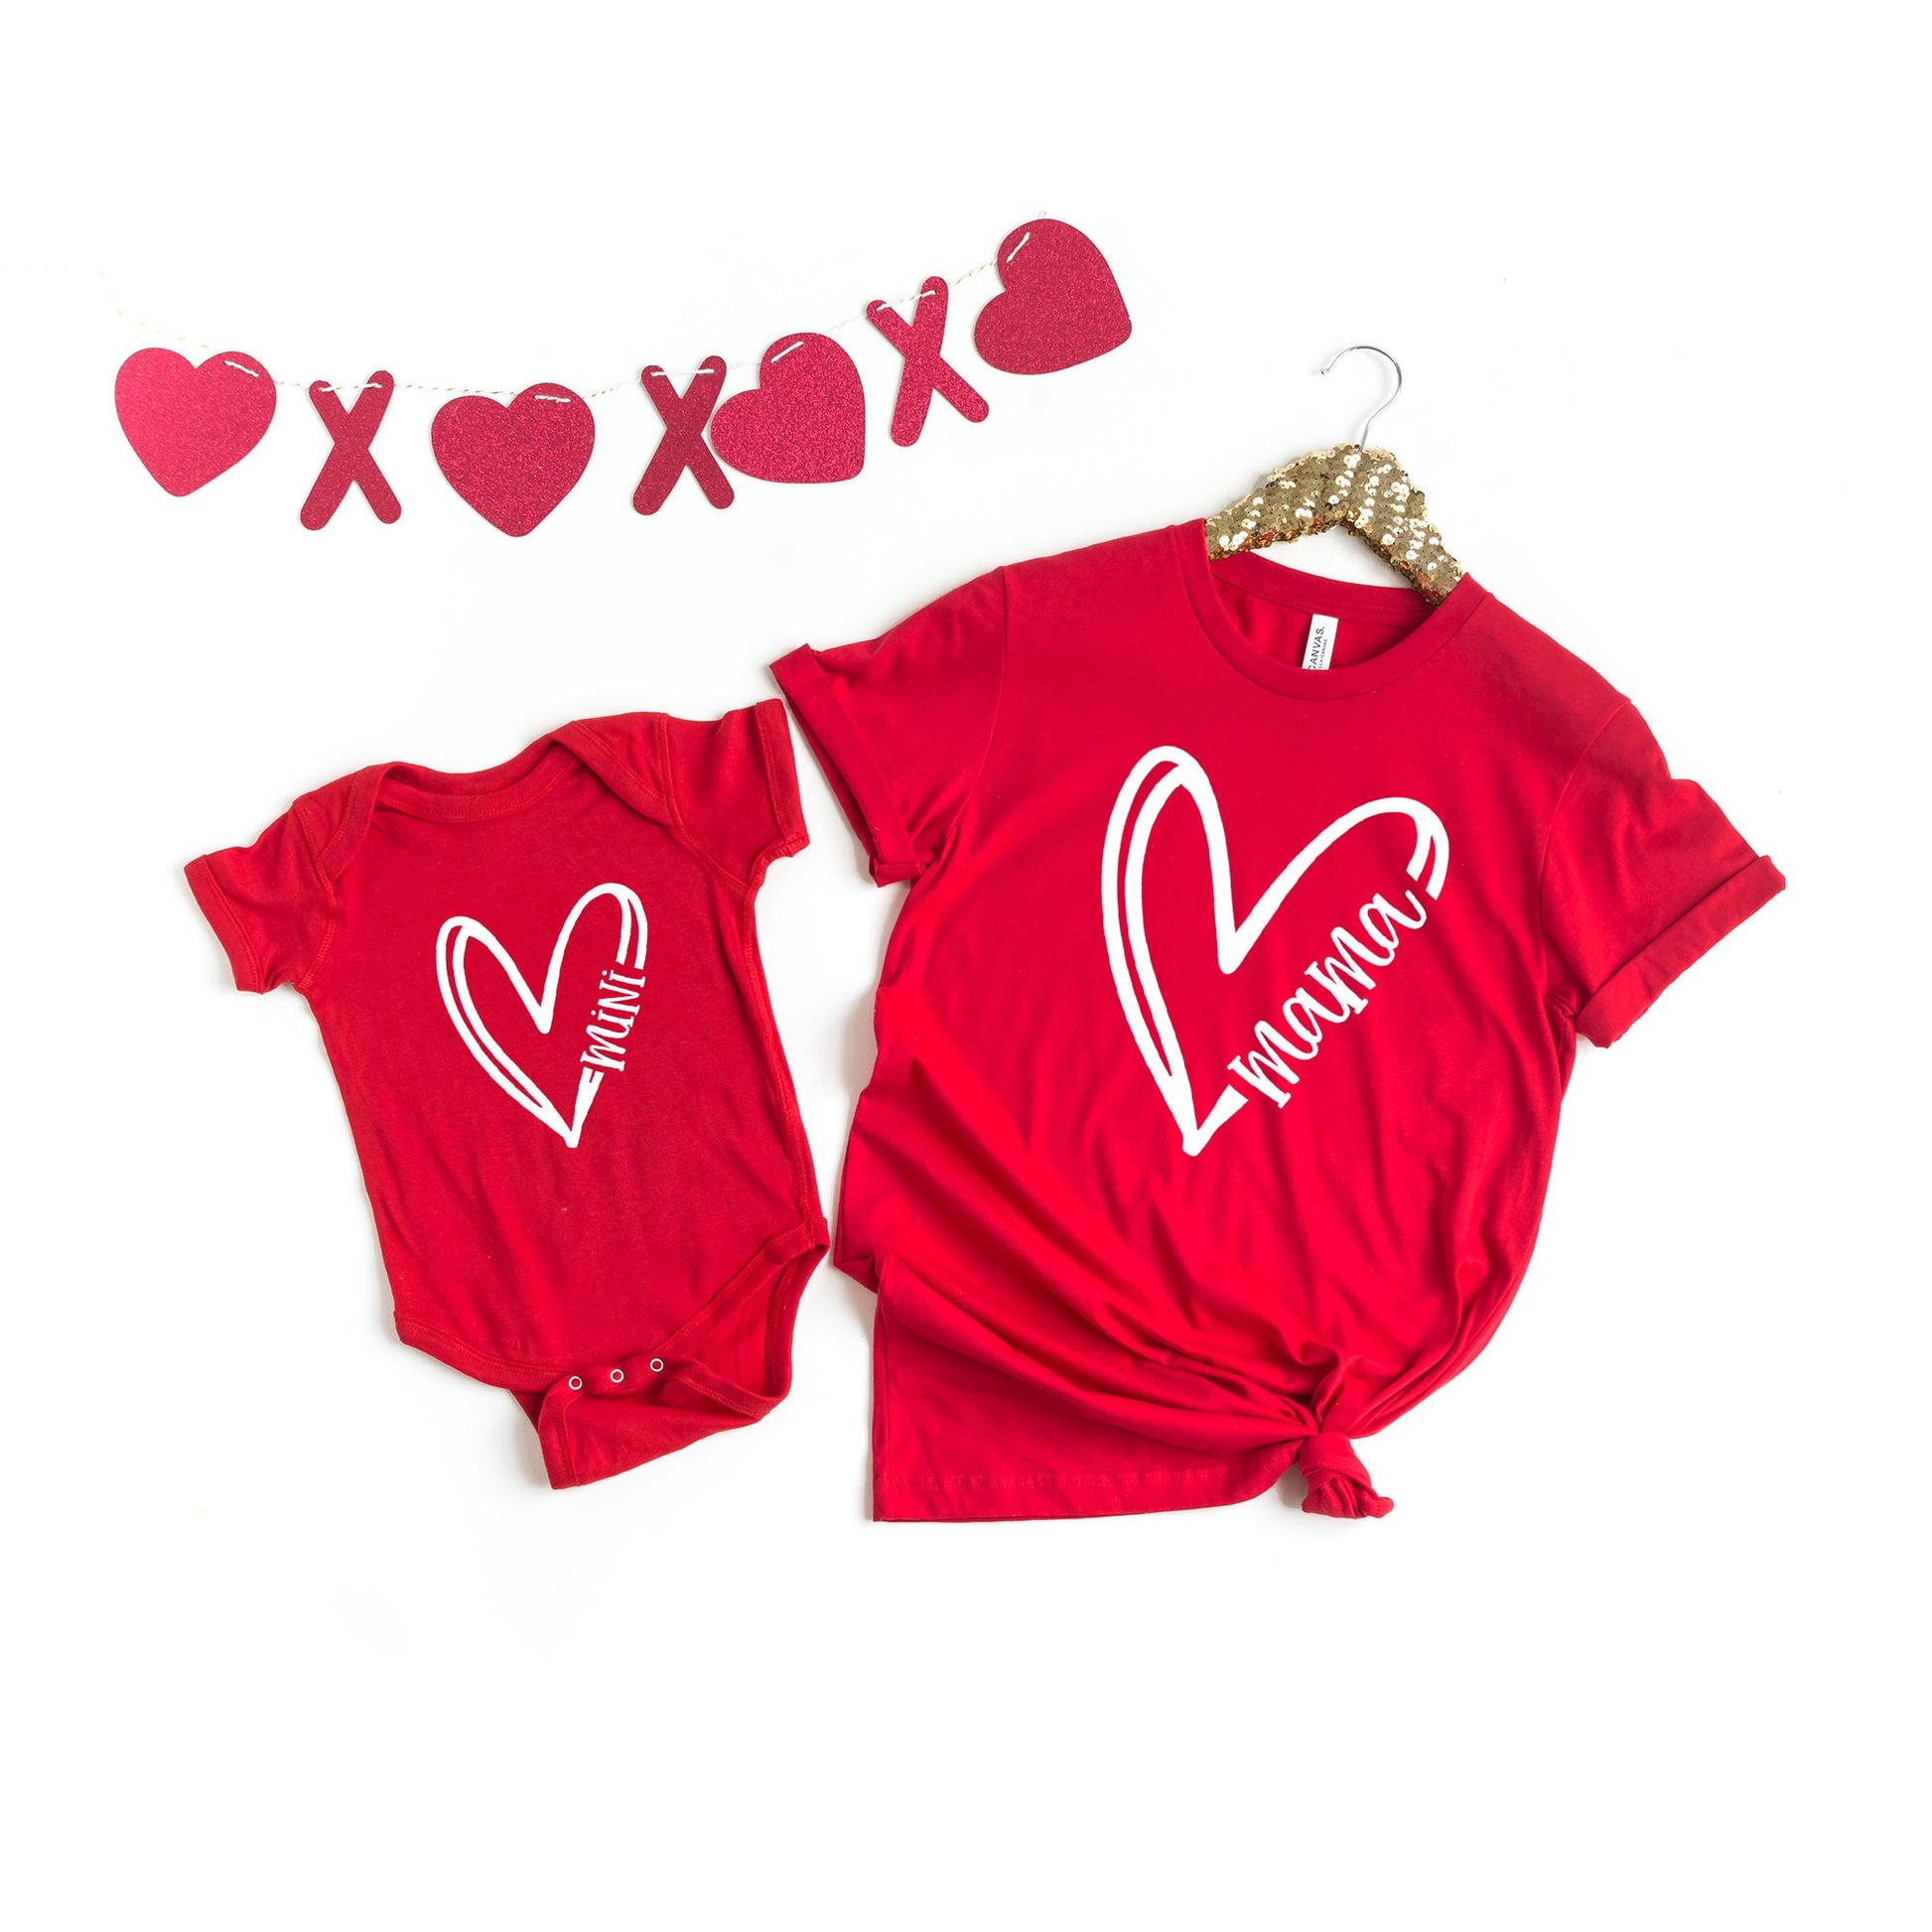 Mama and Mini Tshirt, Valentines Day Matching Shirts, Mama Shirt, Mommy and Me, Mama Mini Matching Shirt, Valentine Outfit